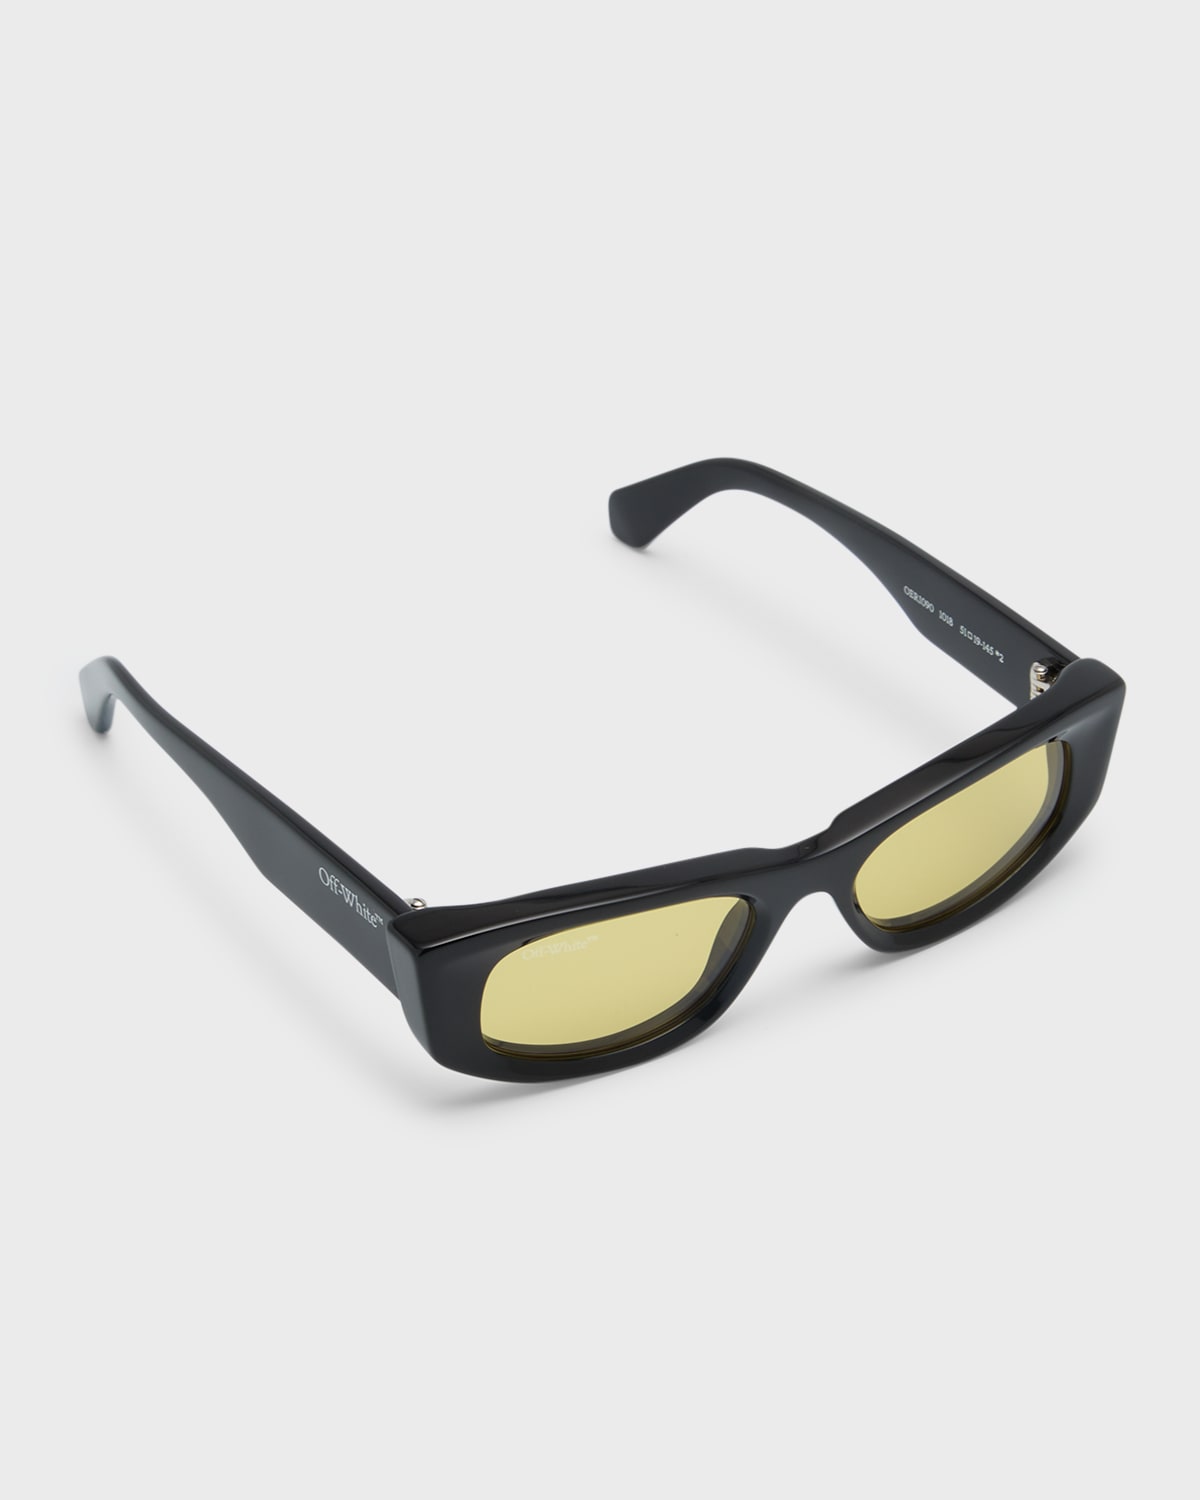 Off-white Matera D-frame Acetate Sunglases In Black  